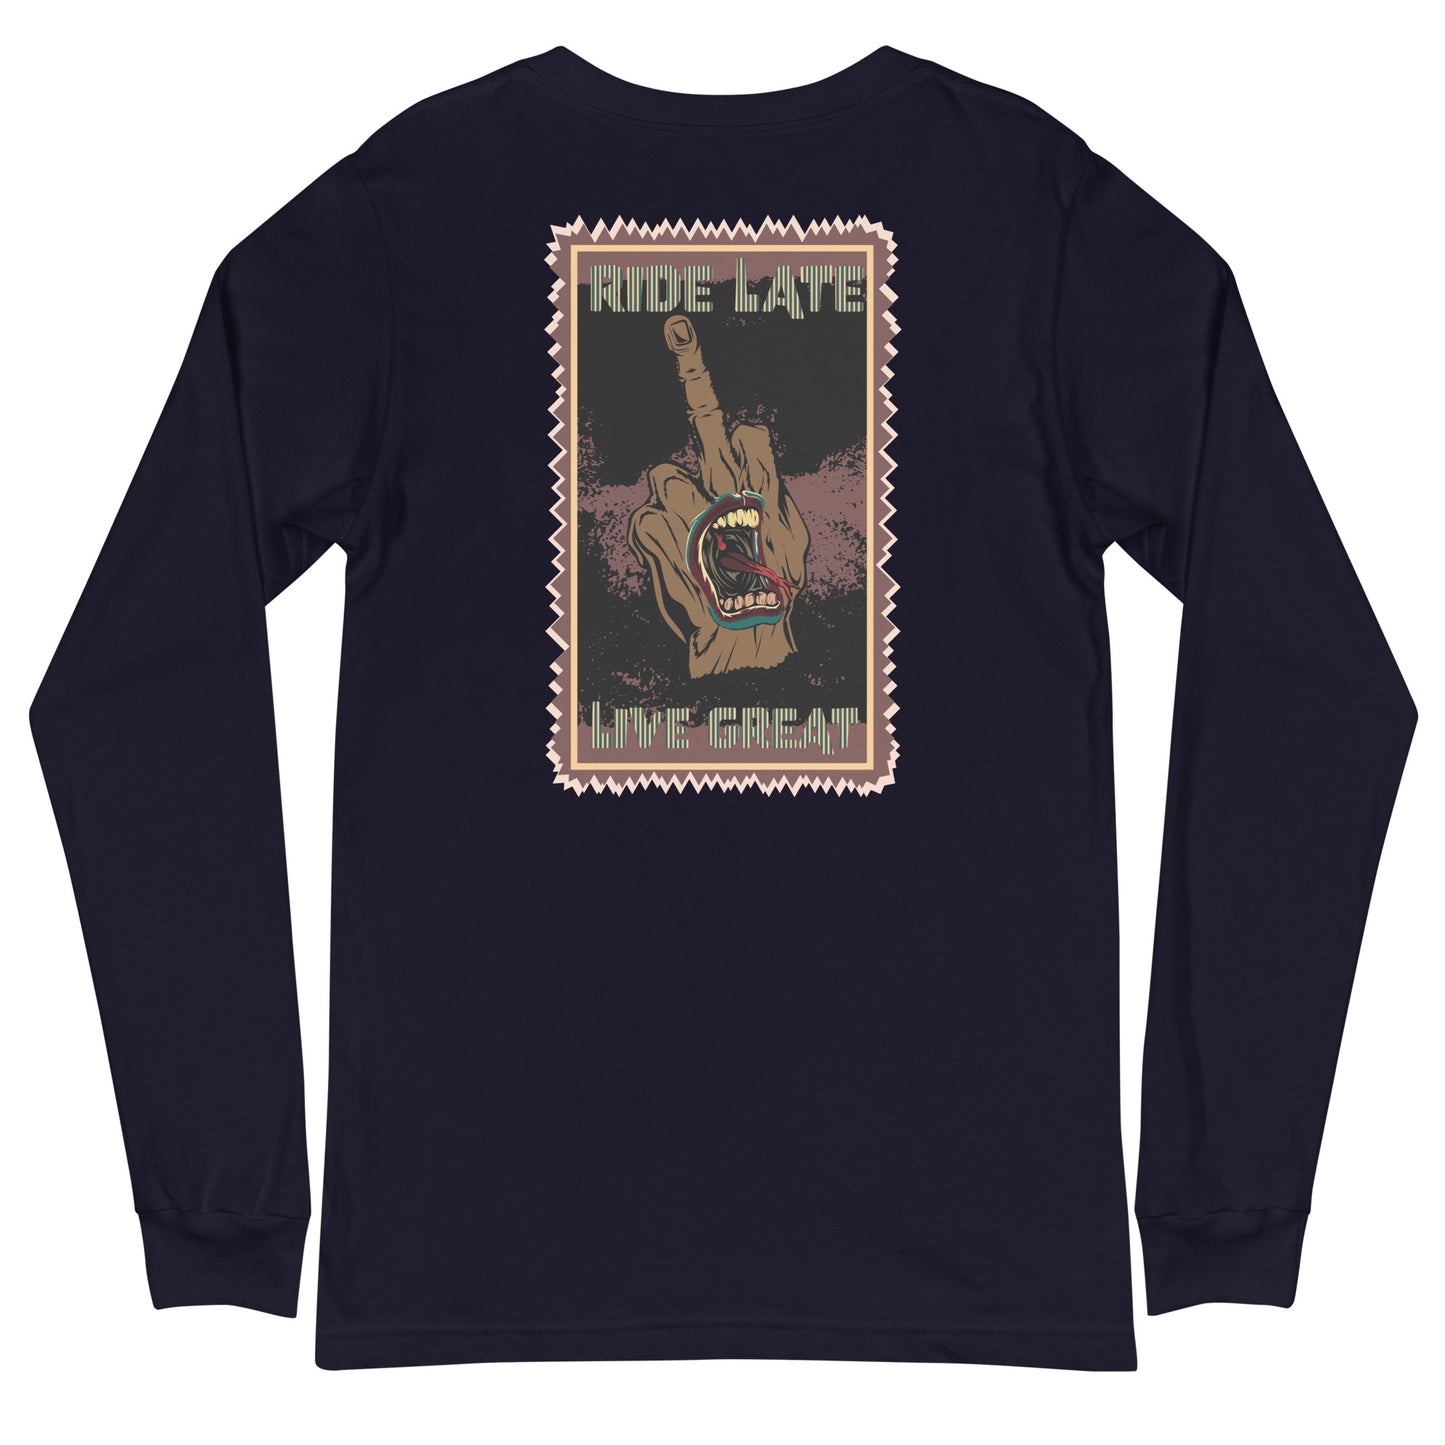 Long Sleeve skate Ride Late Live Late, main majeur en l'air grunge volcom, dos unisex couleur navy